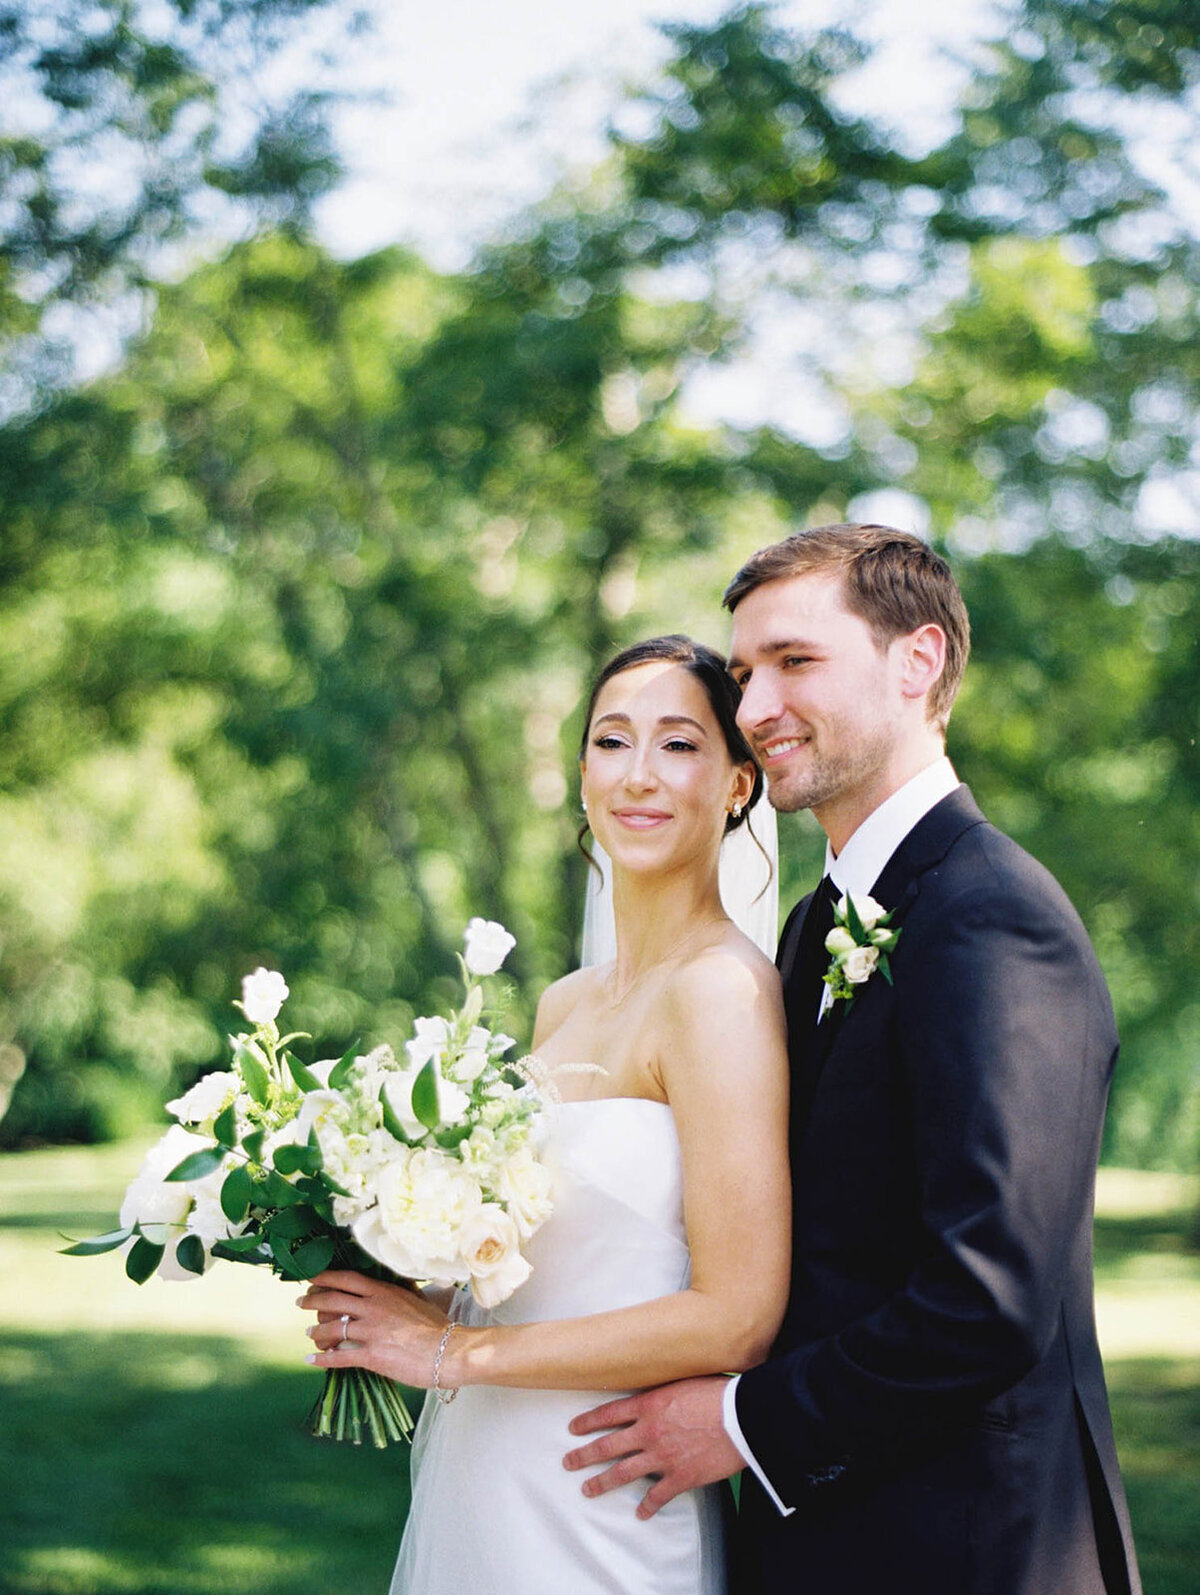 porttrait of bride and groom outdoors on a summer day